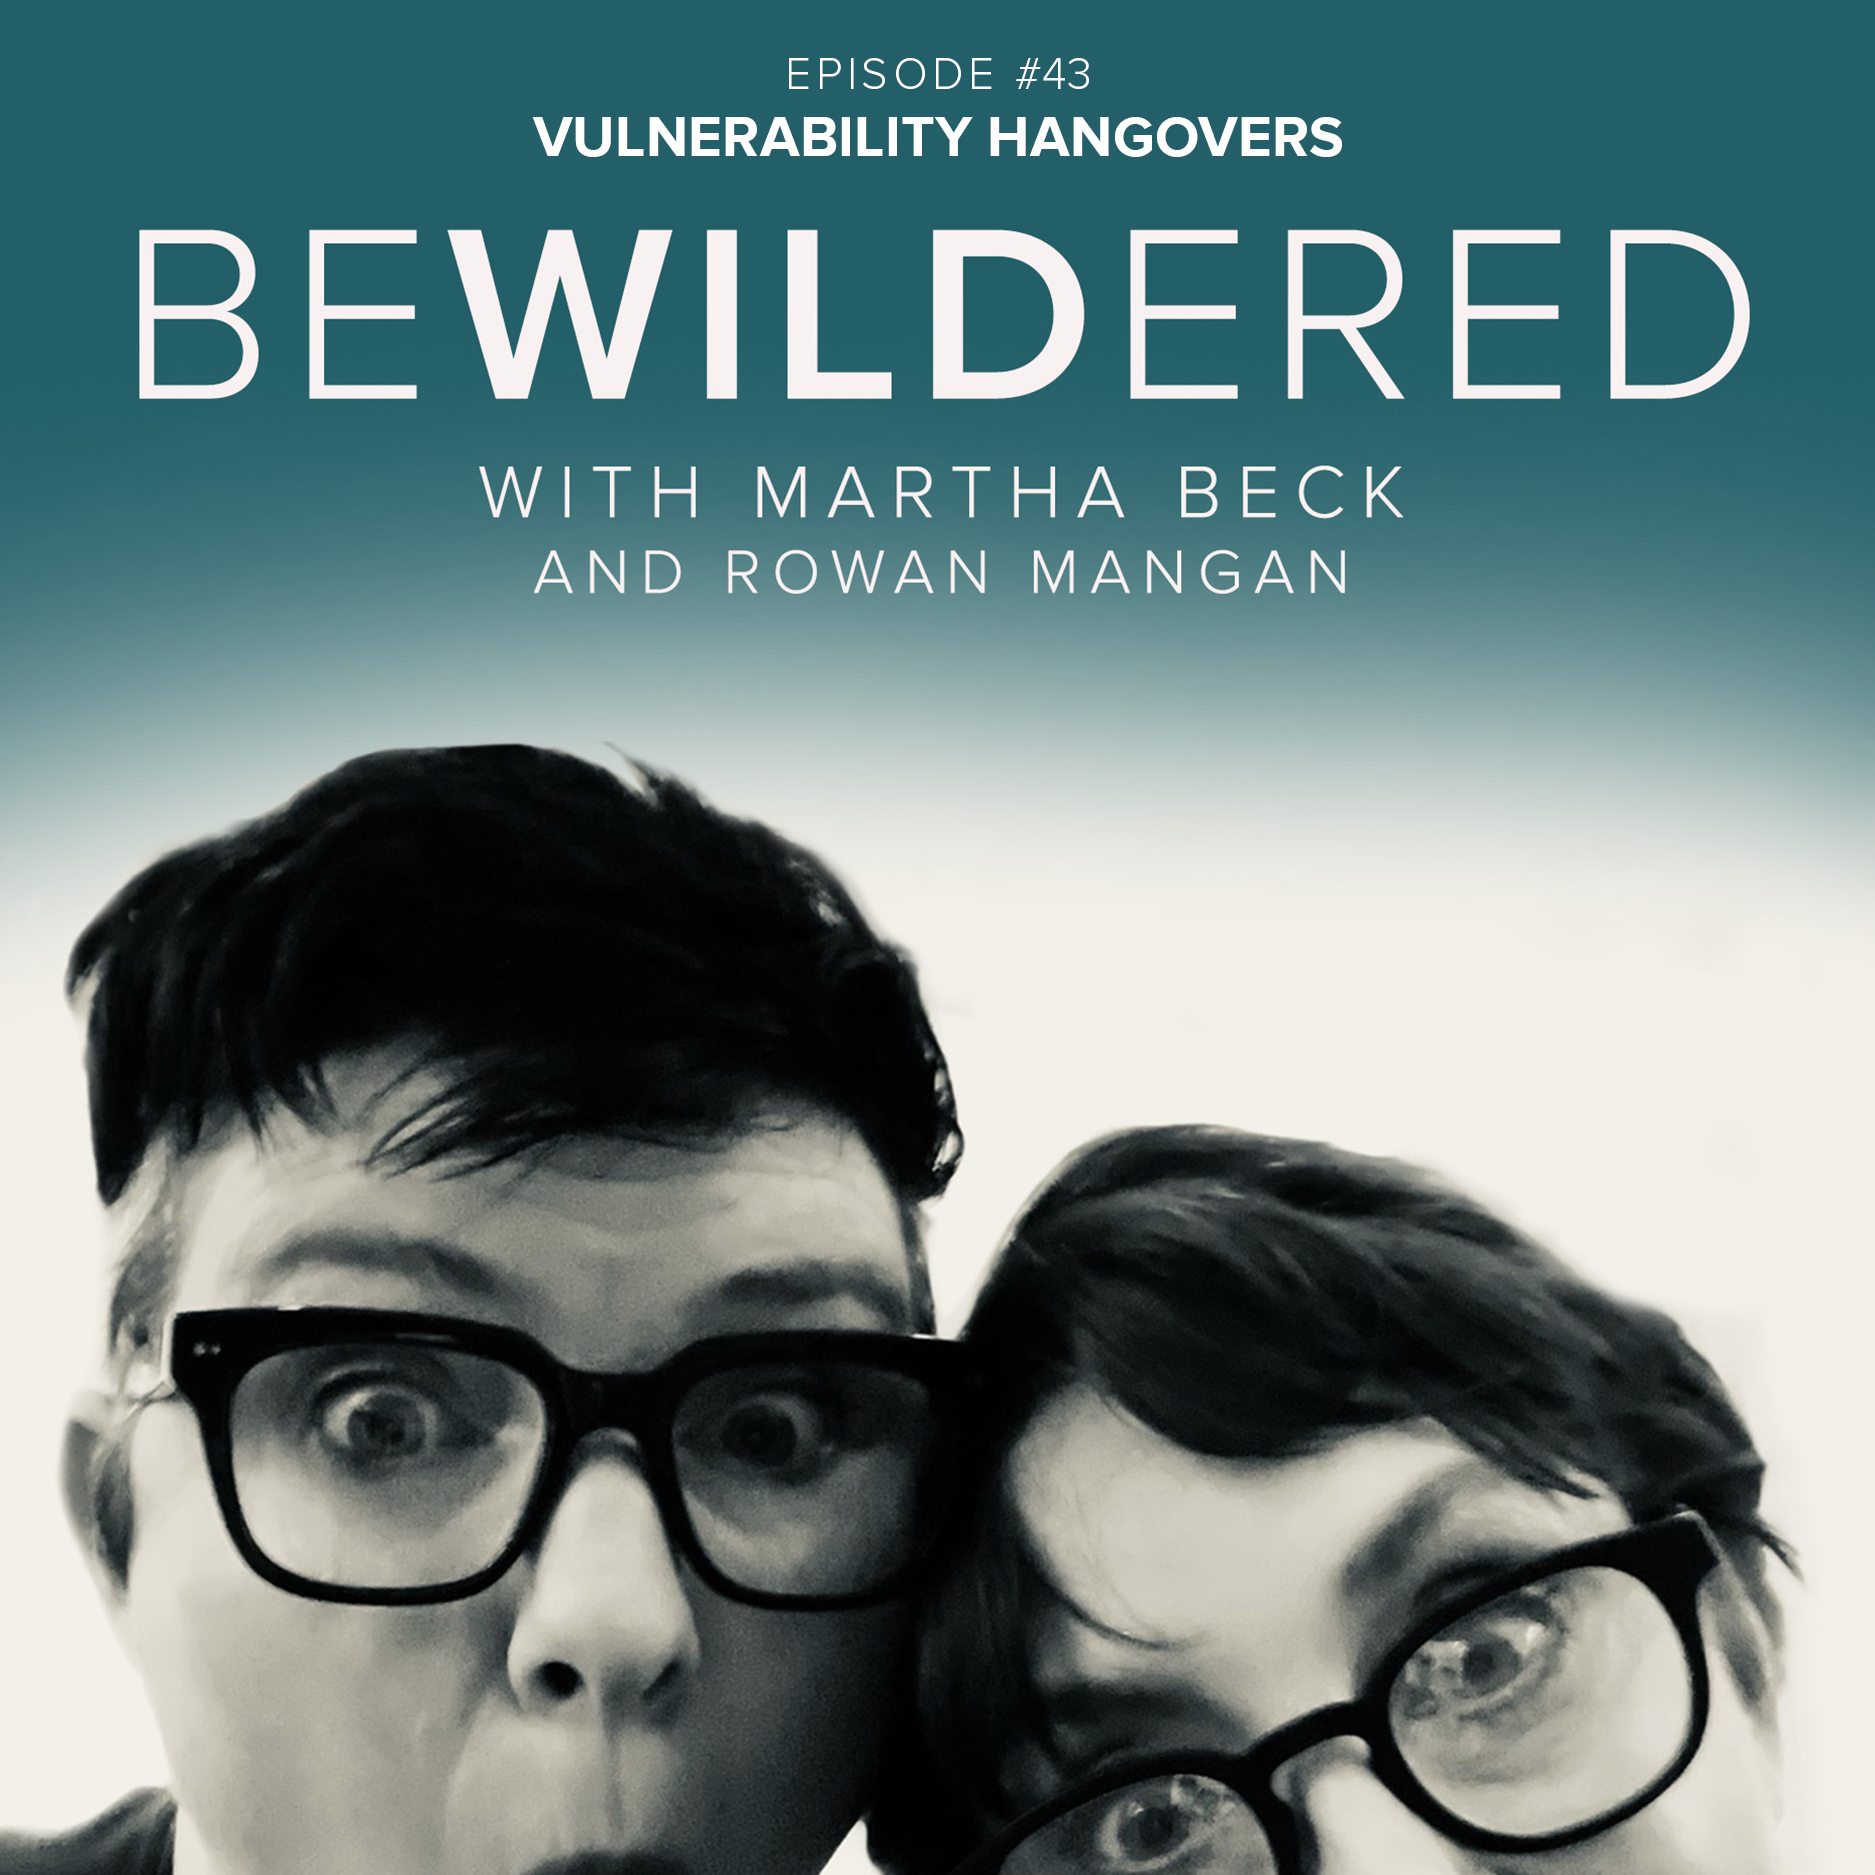 Image for Episode #43 Vulnerability Hangovers for the Bewildered Podcast with Martha Beck and Rowan Mangan